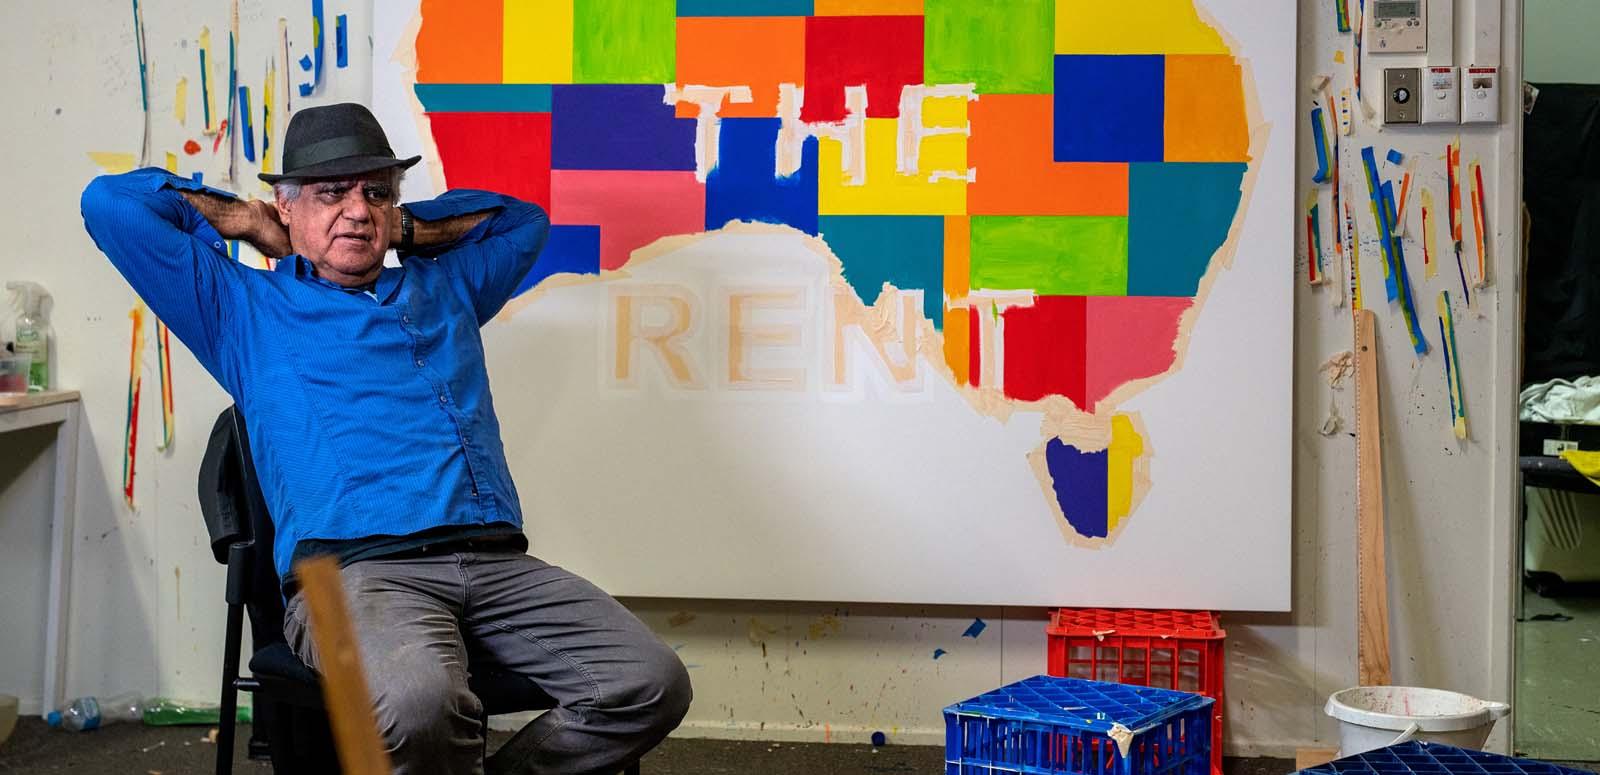 Artist Richard Bell seated in his studio in front of one of his works: a coloured Indigenous map of Australia with the words PAYE THE RENT across it